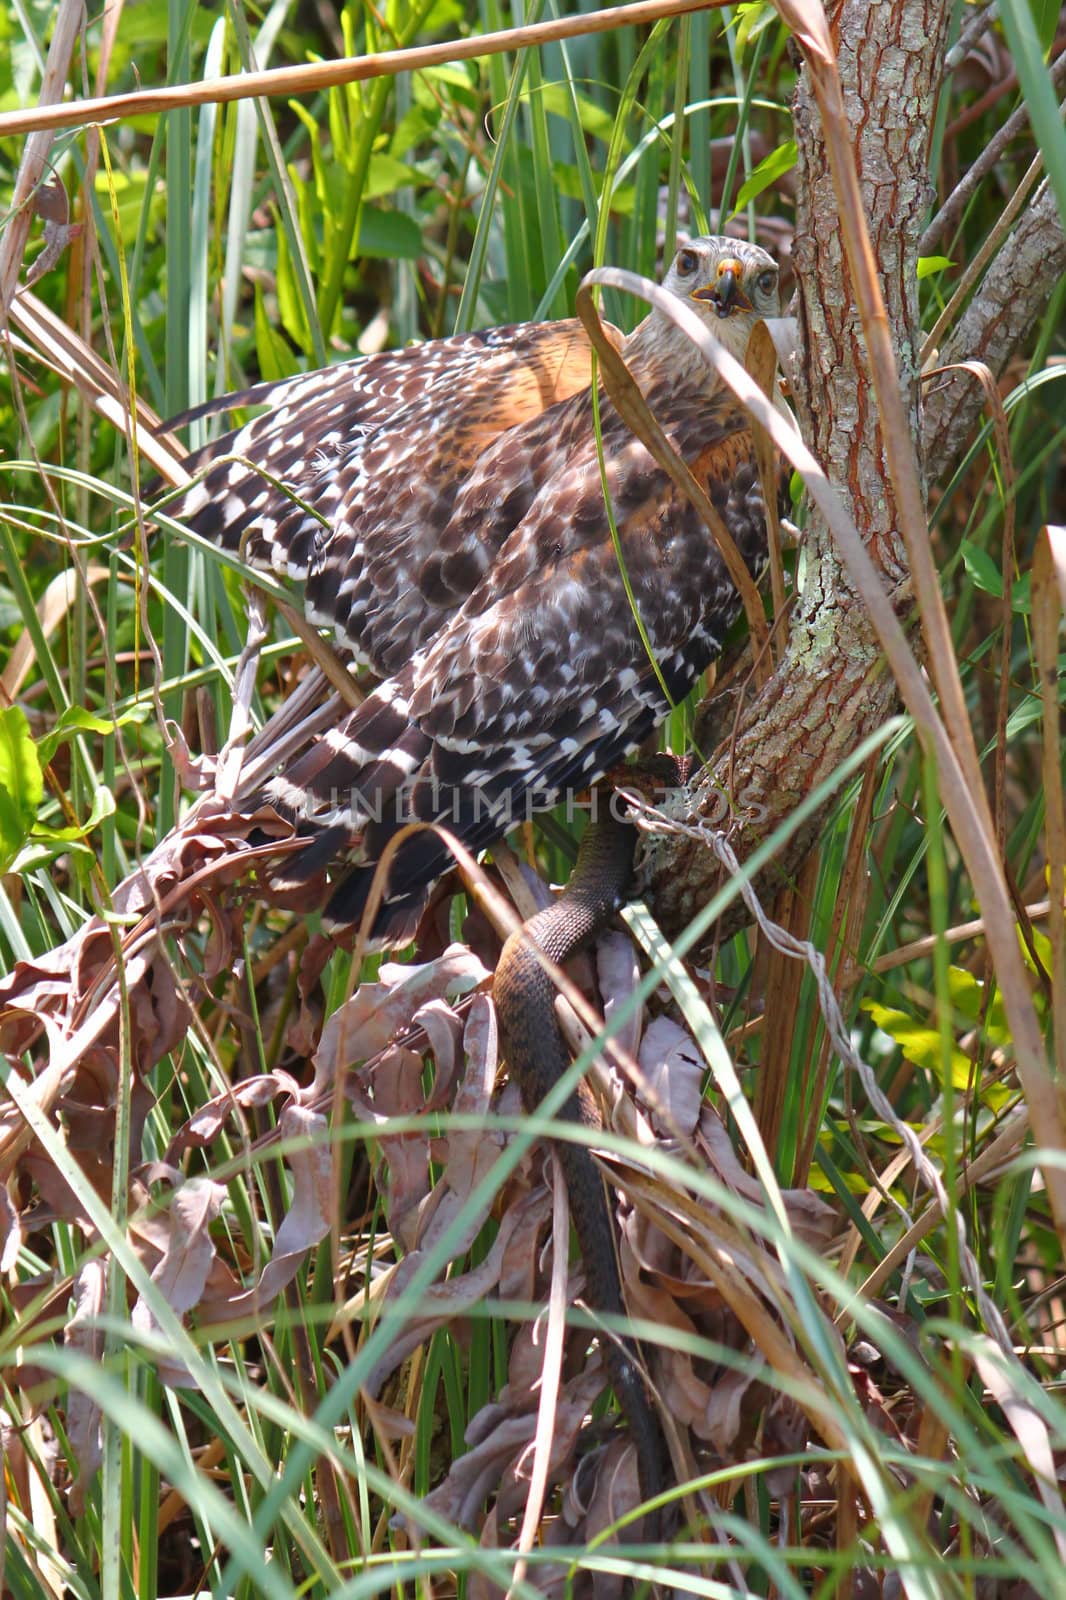 Red-shouldered Hawk (Buteo lineatus) with a captured snake in the Everglades National Park - Florida.